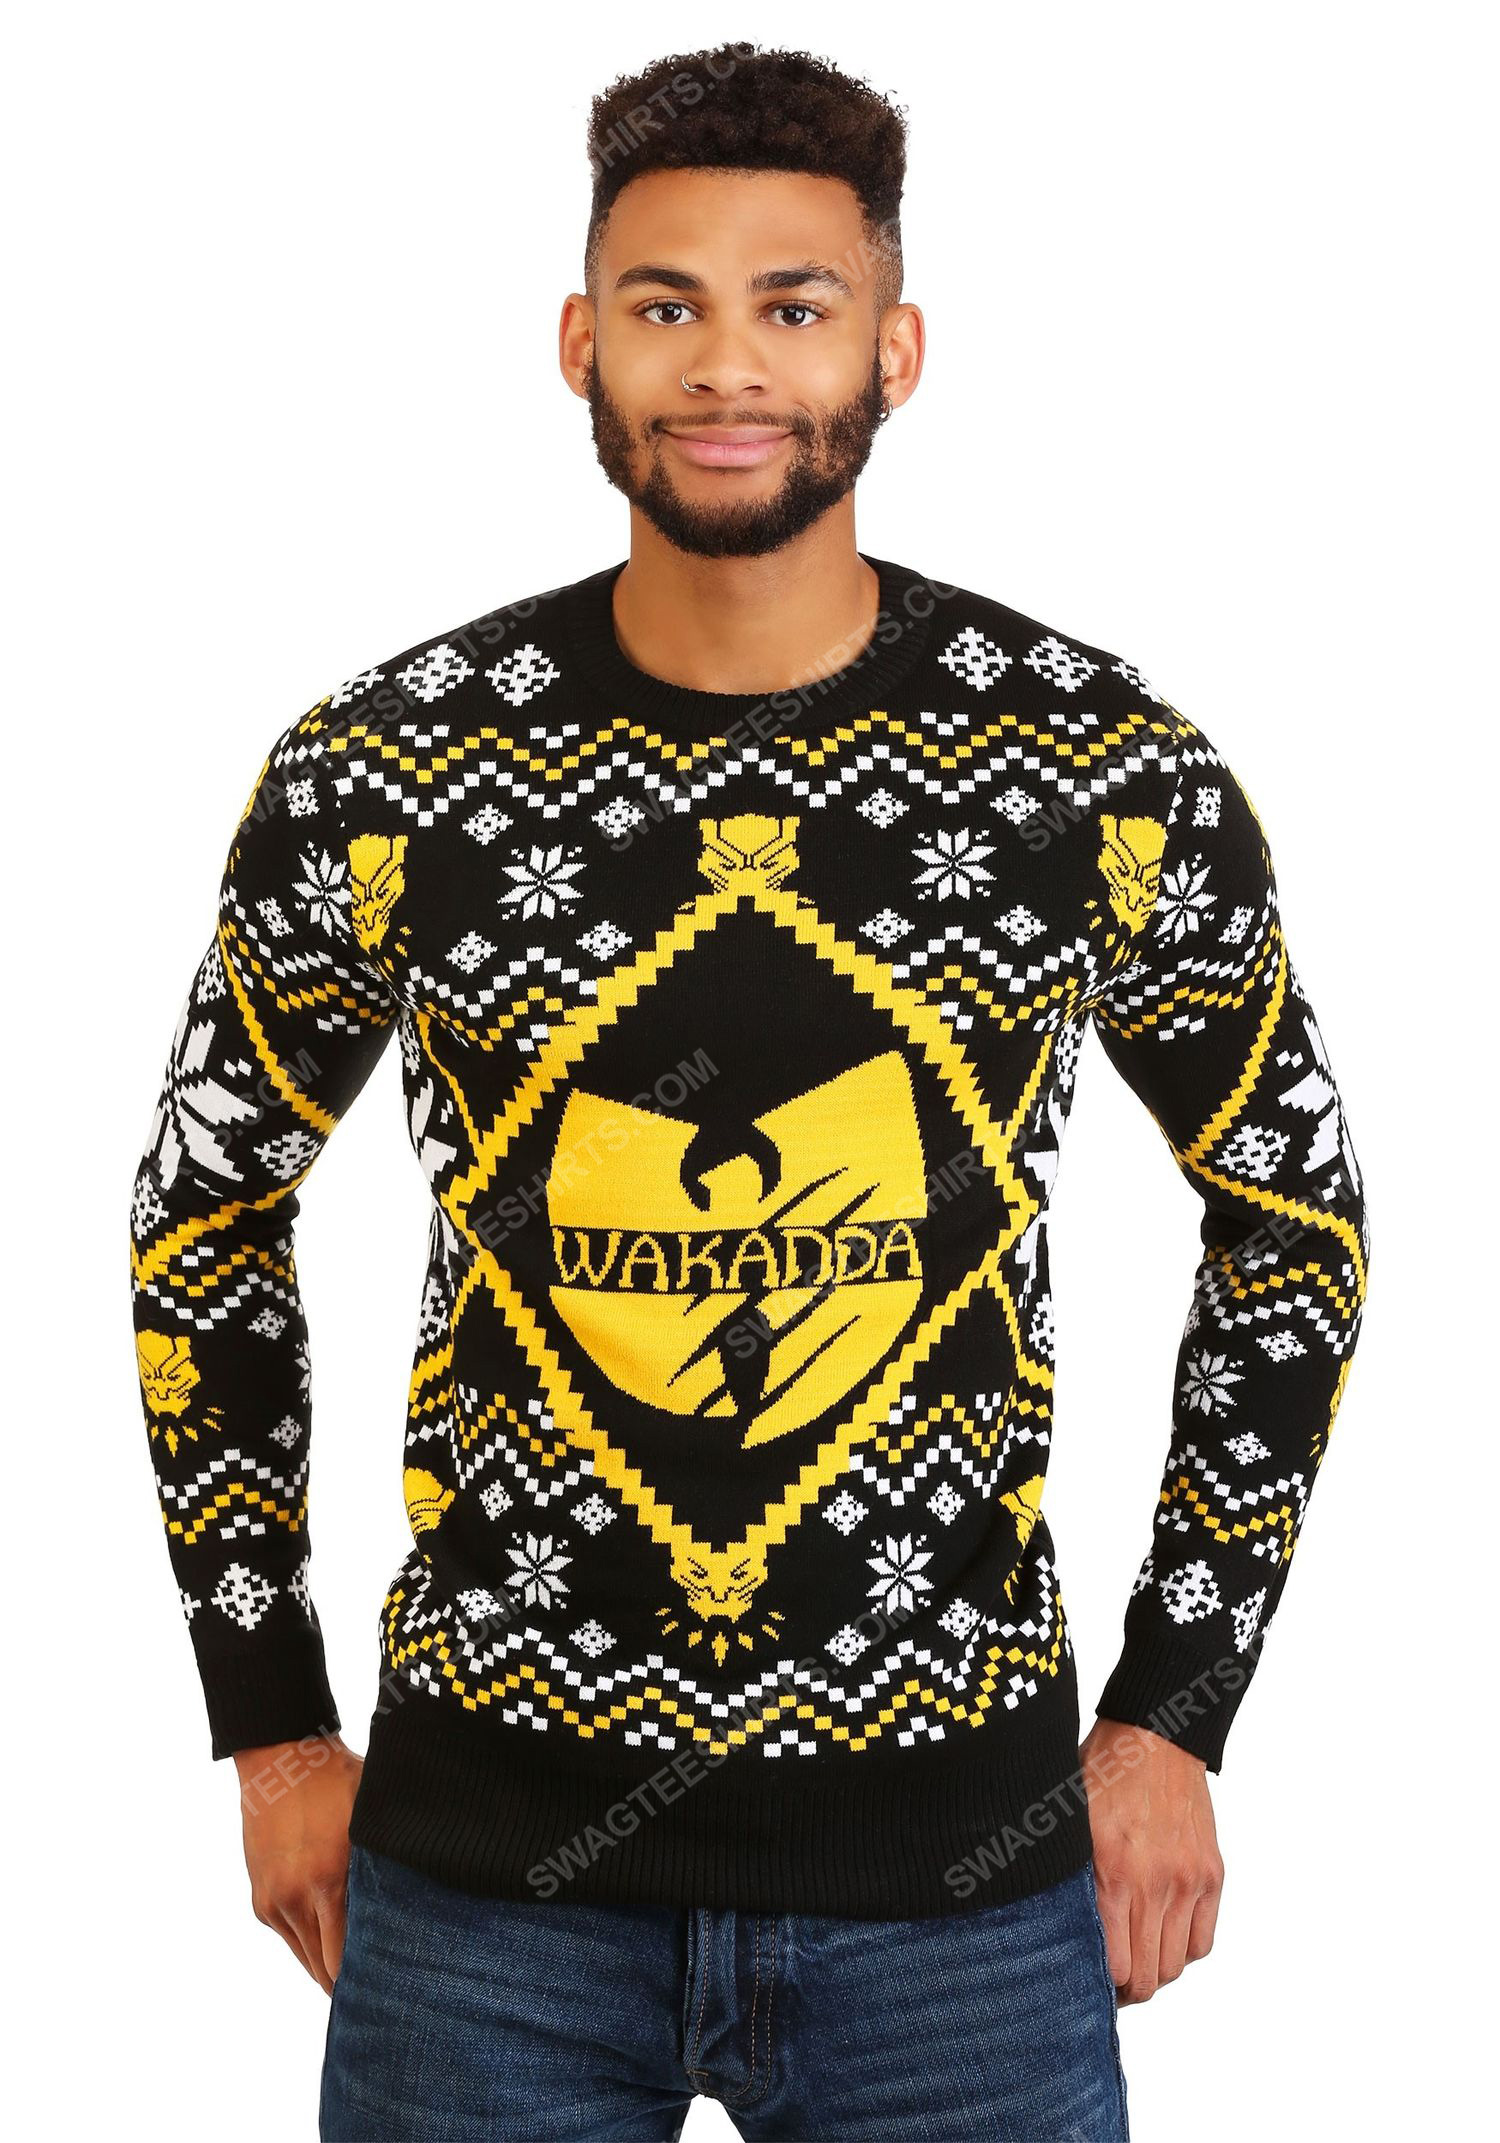 [special edition] Wu tang clan black panther wakanda ugly christmas sweater – maria